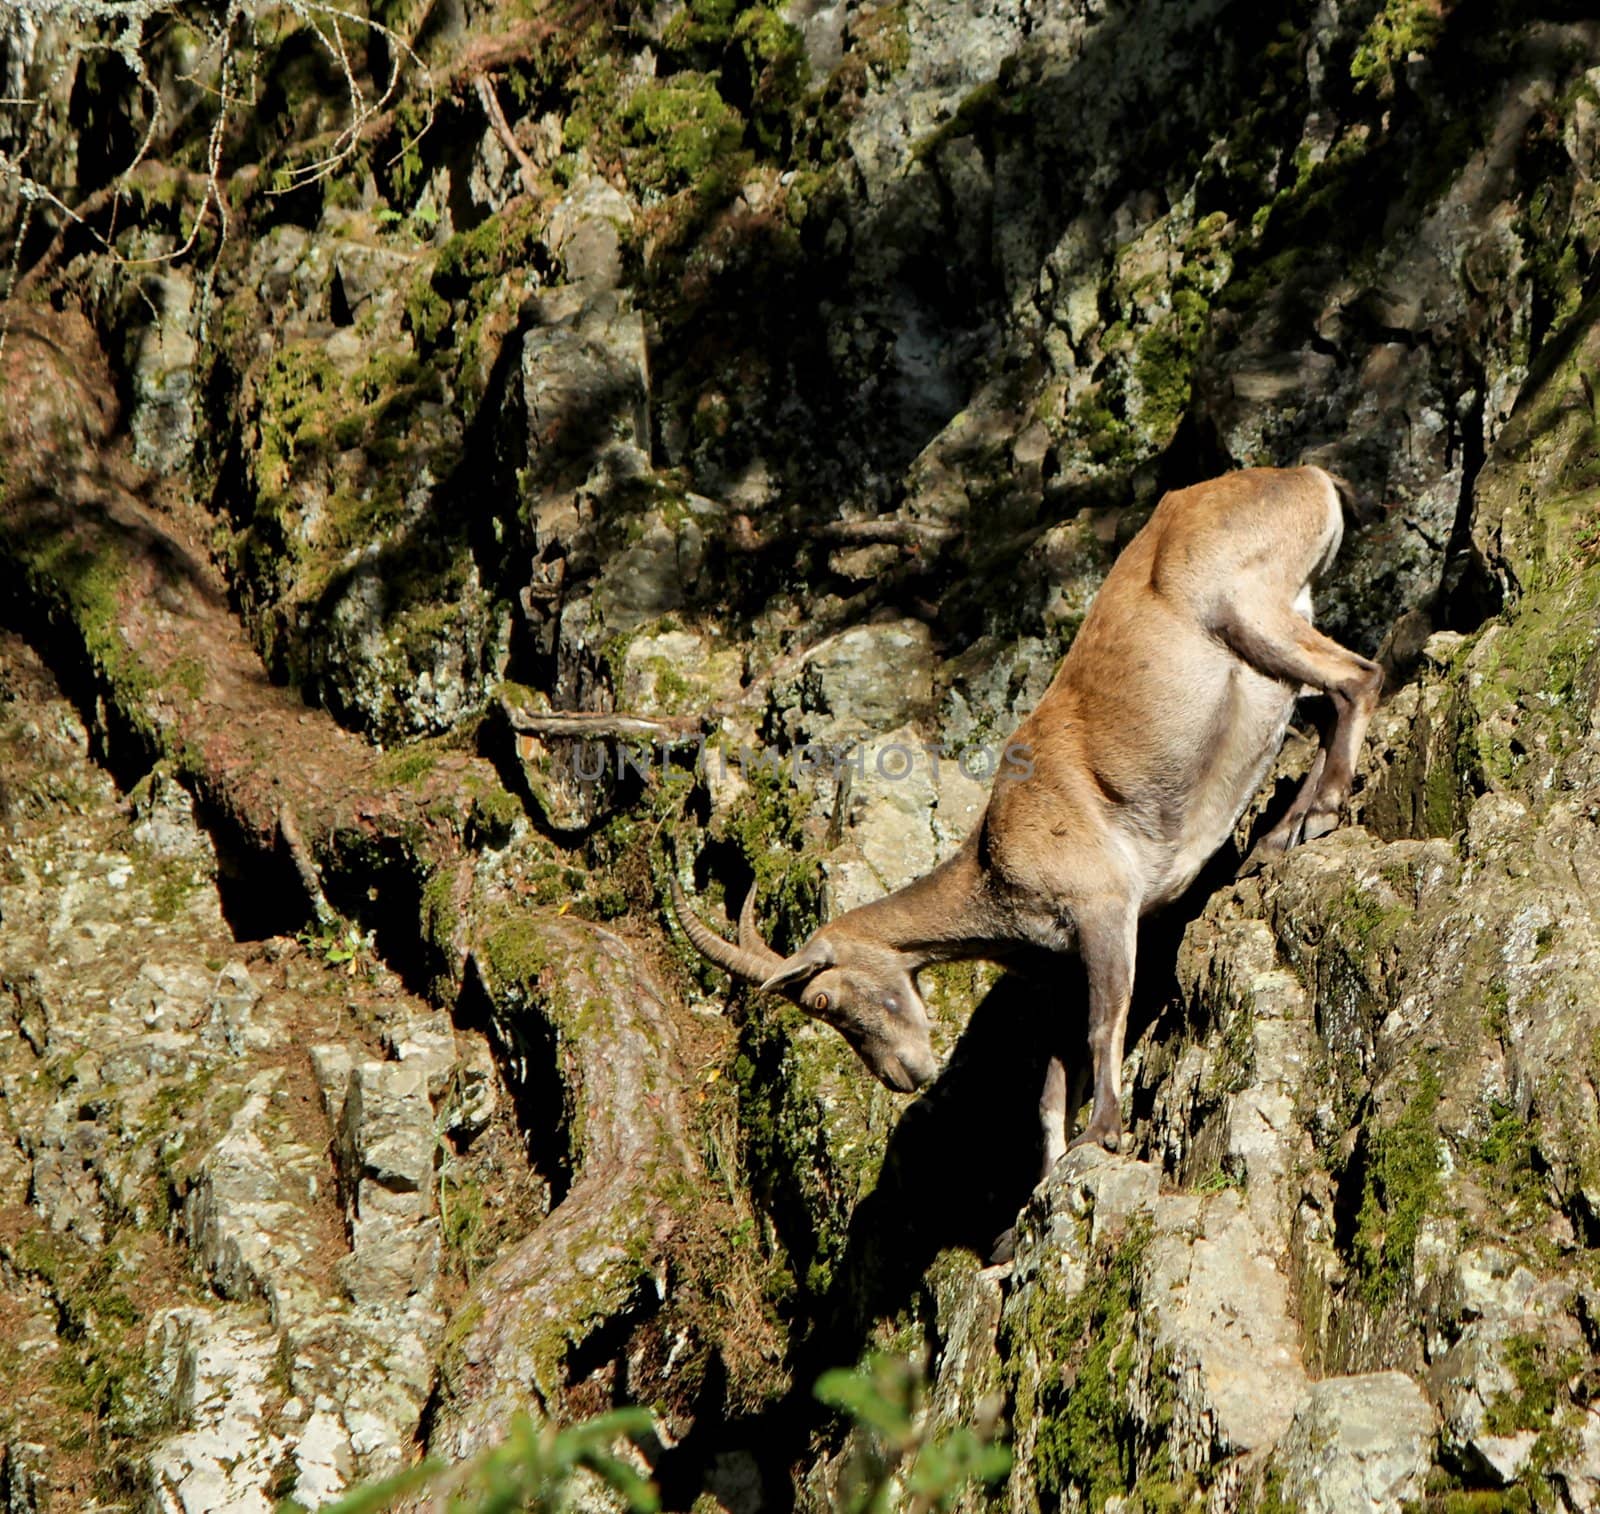 Brown beautiful ibex going down the rocks in the mountain near a trunk